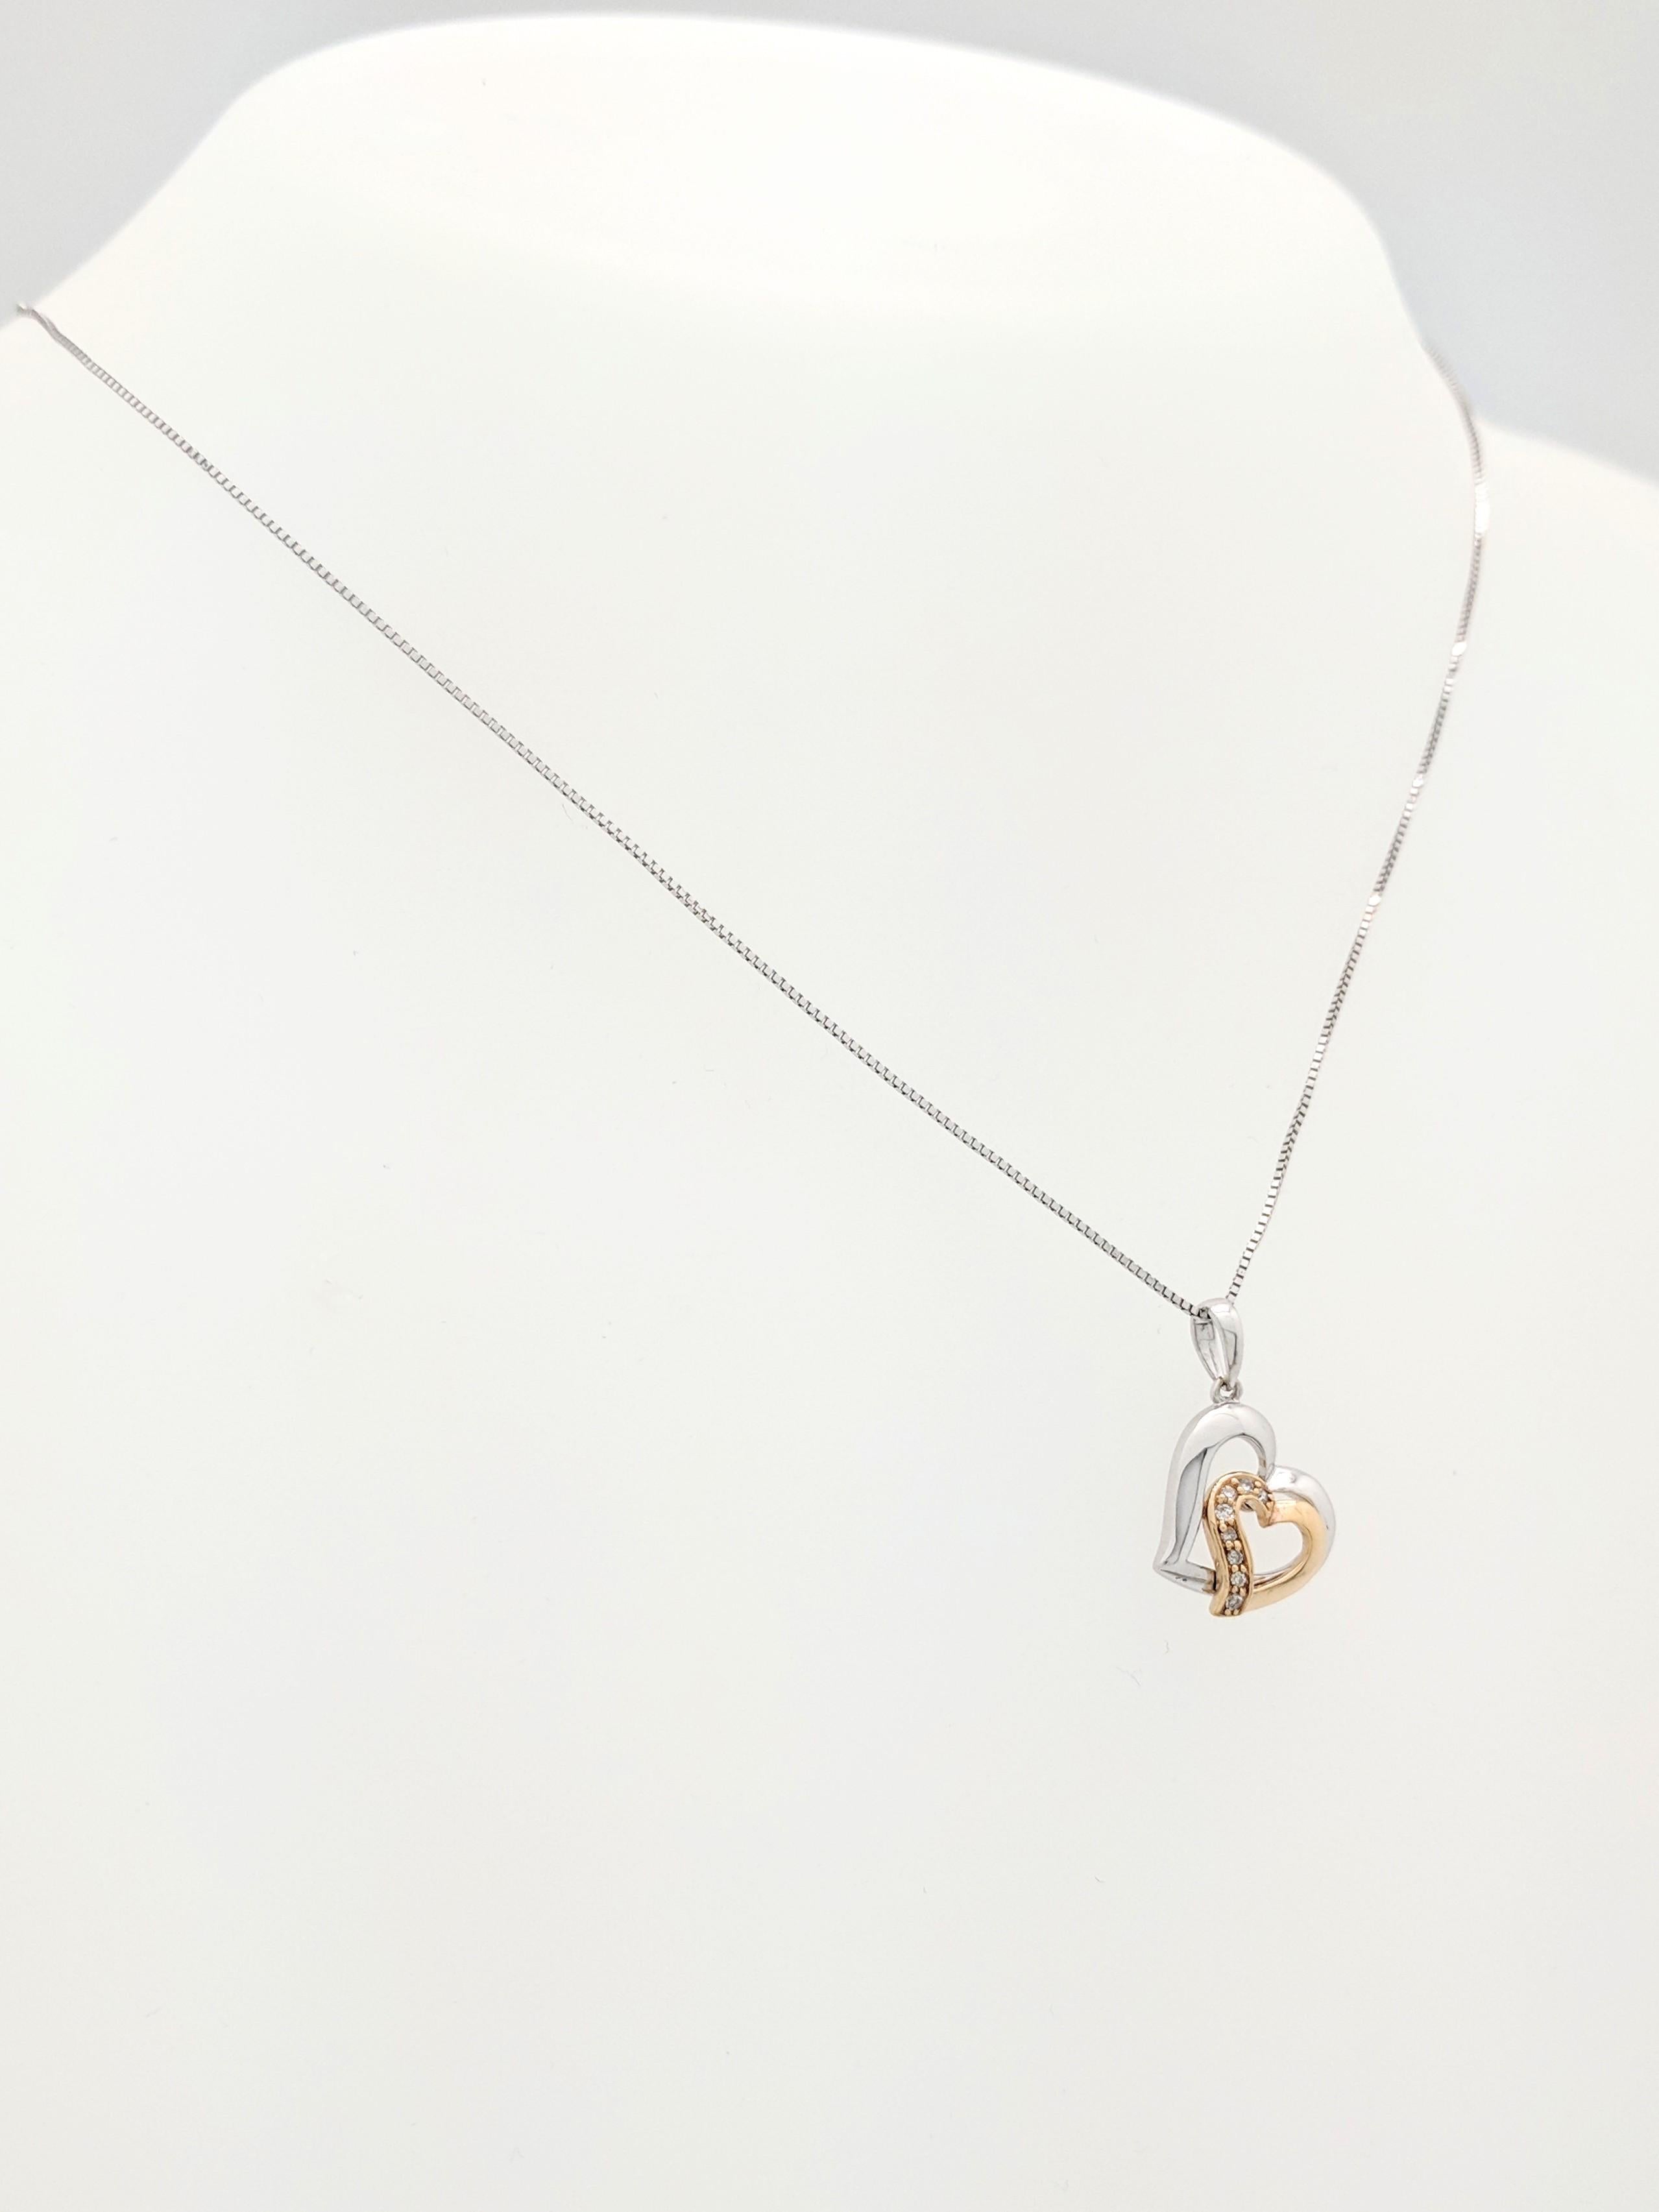 10K 2-Tone Diamond Heart Pendant Necklace

You are viewing a beautiful diamond heart pendant necklace. The piece is crafted from 10k white & yellow gold and weighs 1.8 gram. It features (8) .015ct round brilliant cut diamonds for an estimated